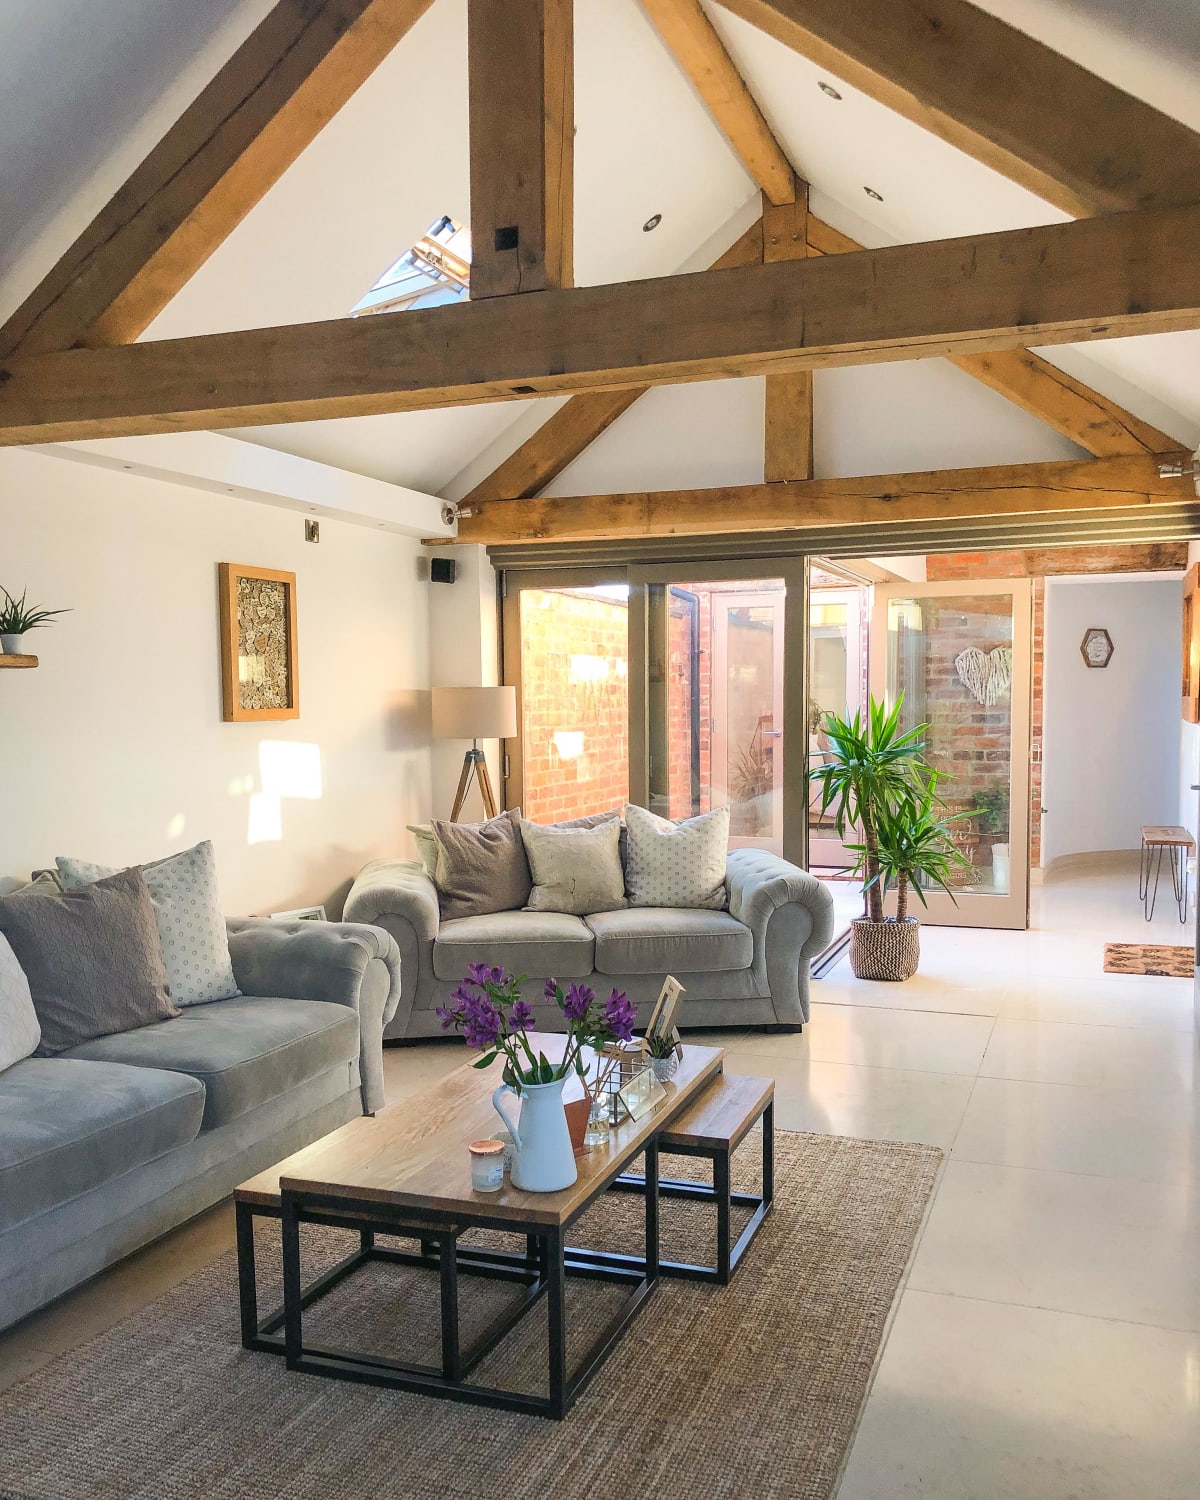 Main living area of our converted cow barn. Staffordshire, UK